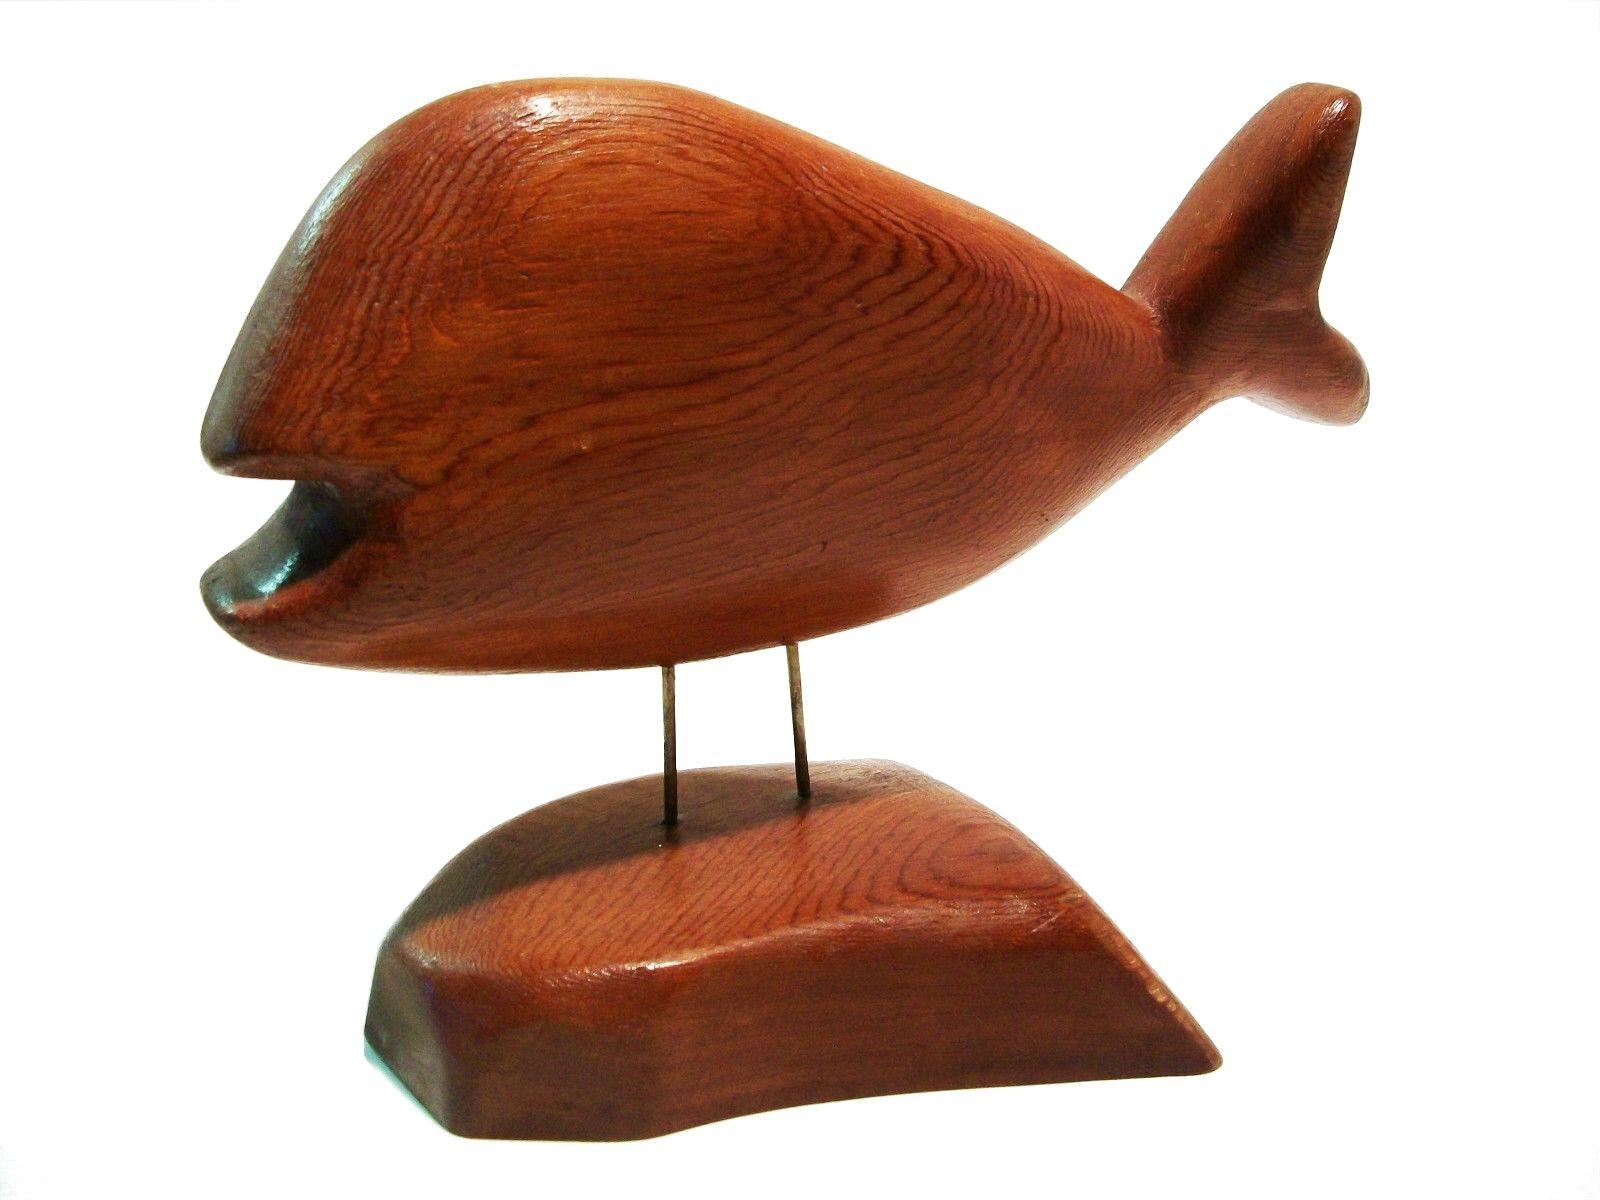 MIKE MATAS - Vintage folk art hand-carved pine model of a whale - mounted by two brass pins to the base - finished with a semi-gloss varnish - signed and dated - possibly from the east coast of Canada - circa 1980. 

Excellent vintage condition - no